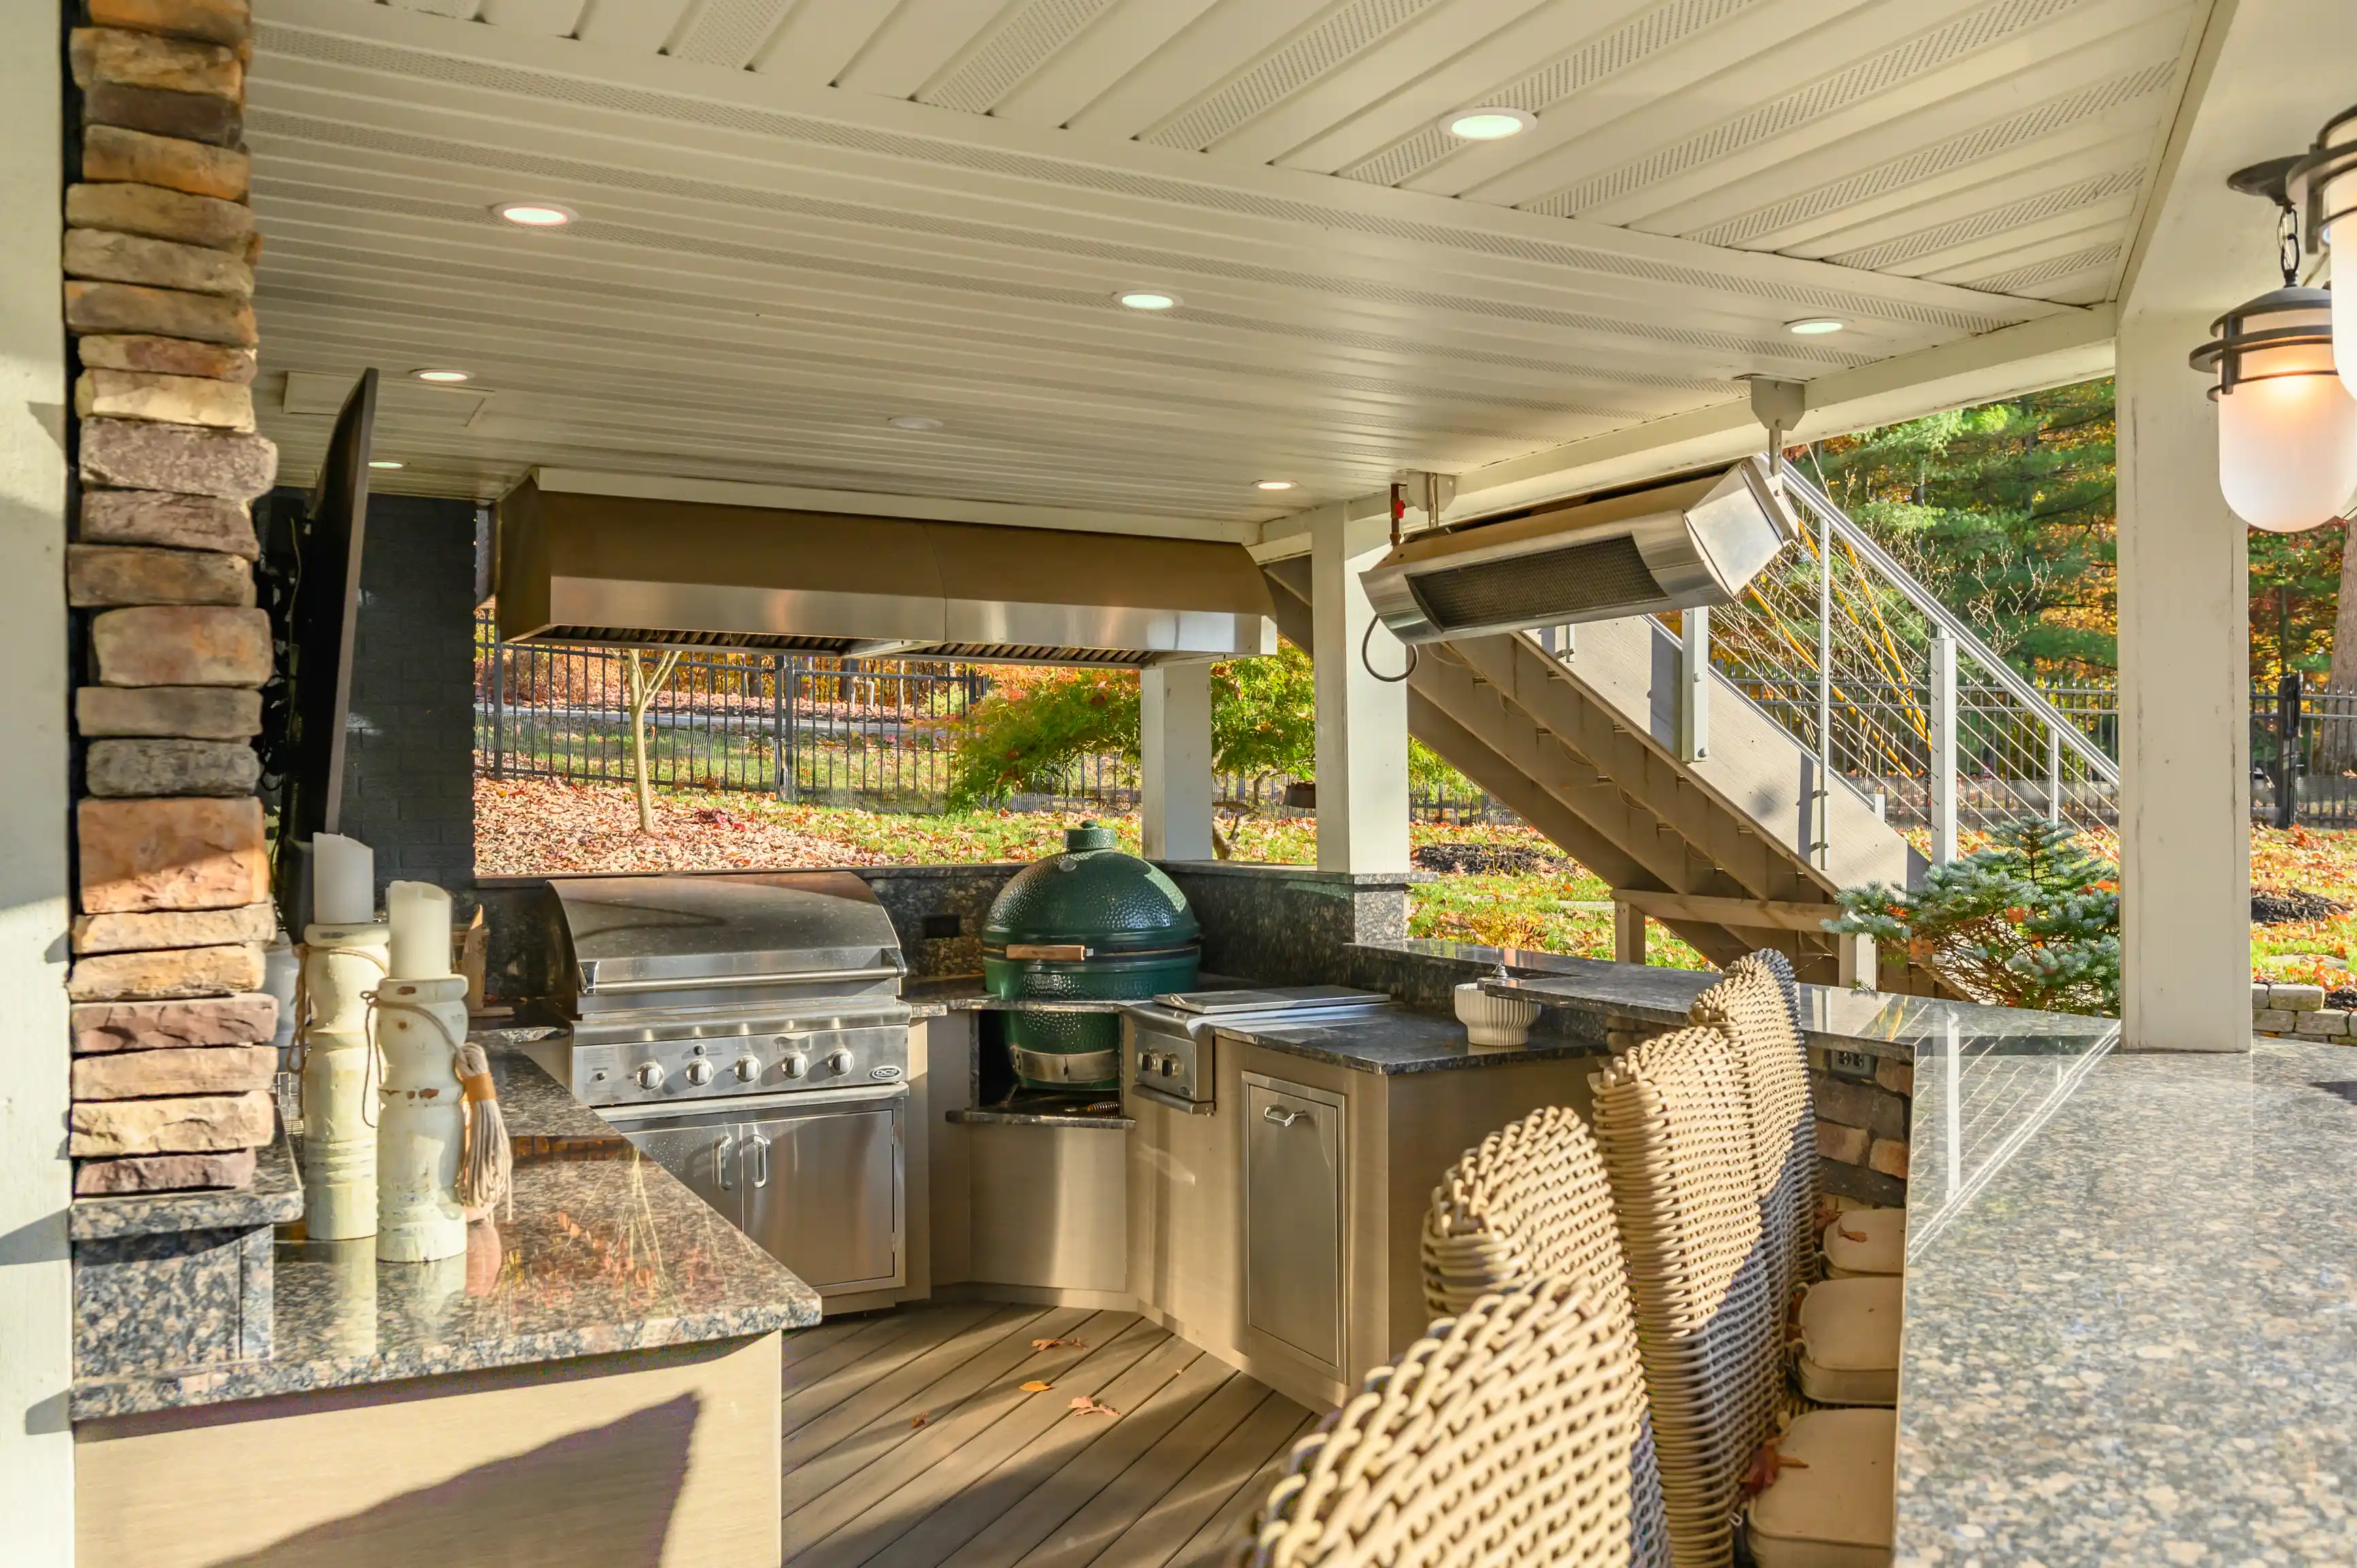 Outdoor patio with modern grilling area, including a built-in barbecue and smoker, under a covered deck with wicker furniture, overlooking an autumn garden.